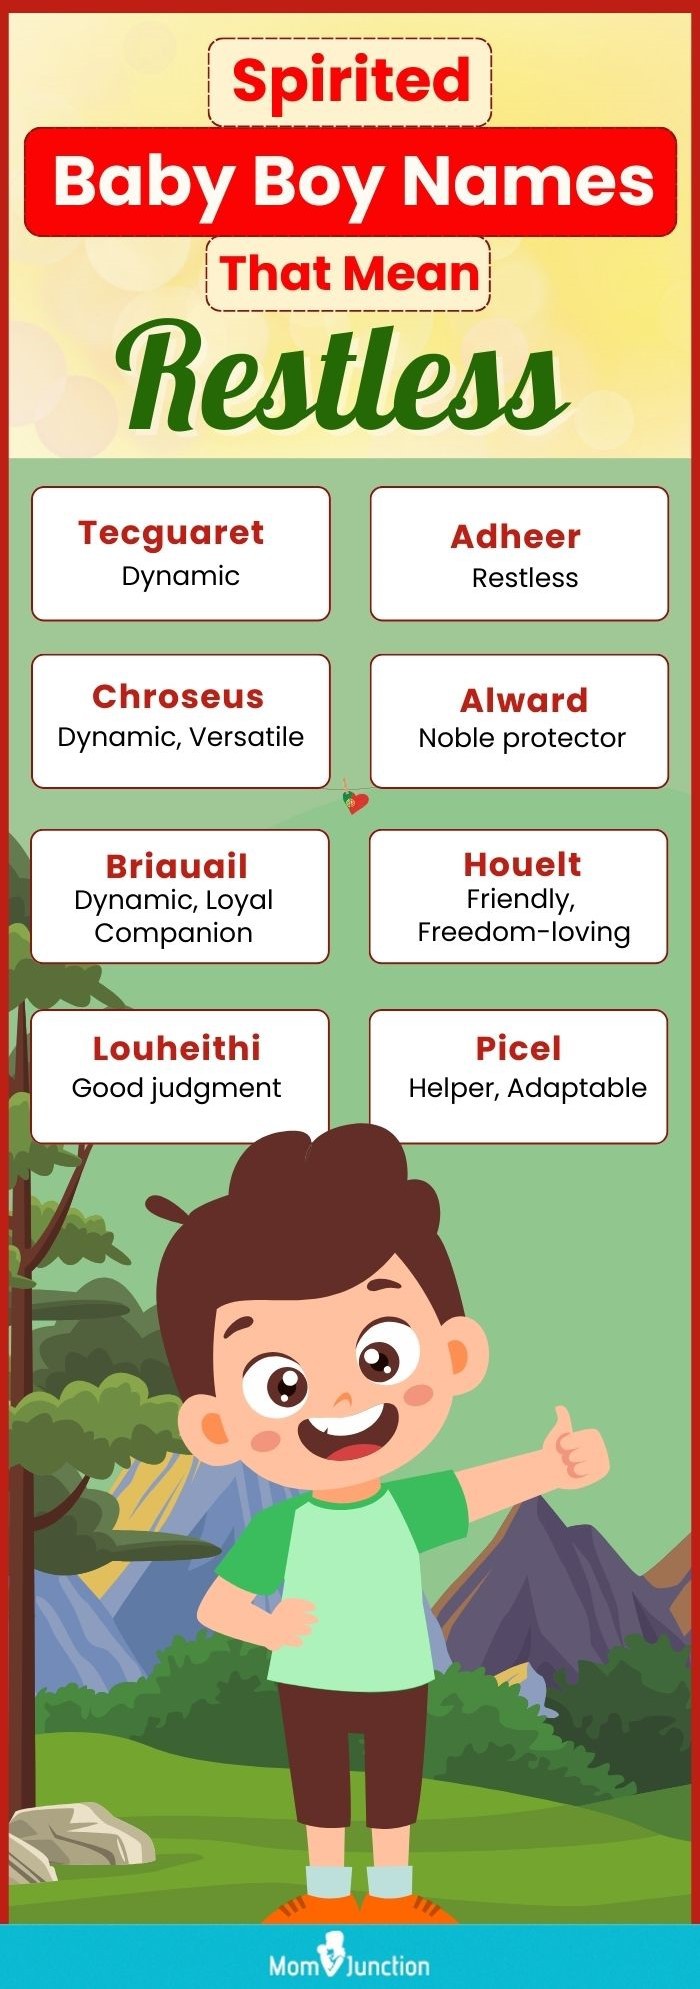 spirited baby boy names that mean restless (infographic)